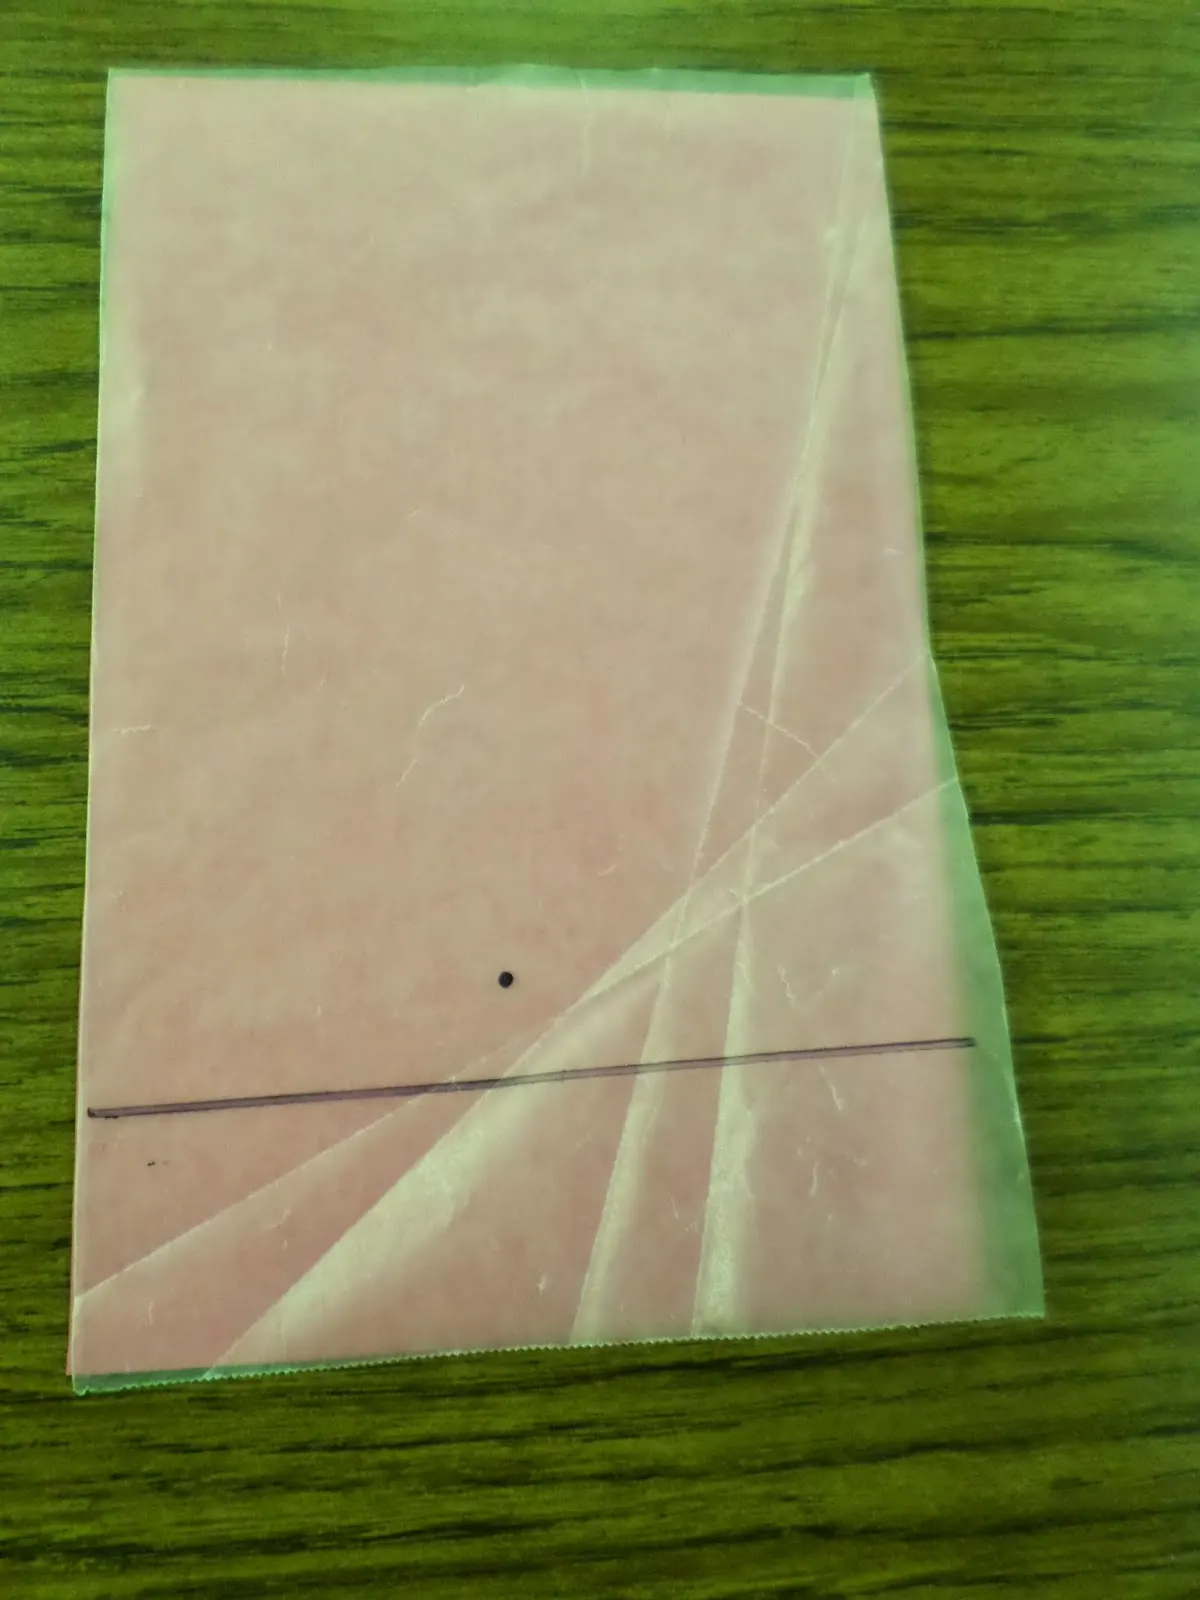 Several Creases on Wax Paper for Wax Paper Parabola Activity. 